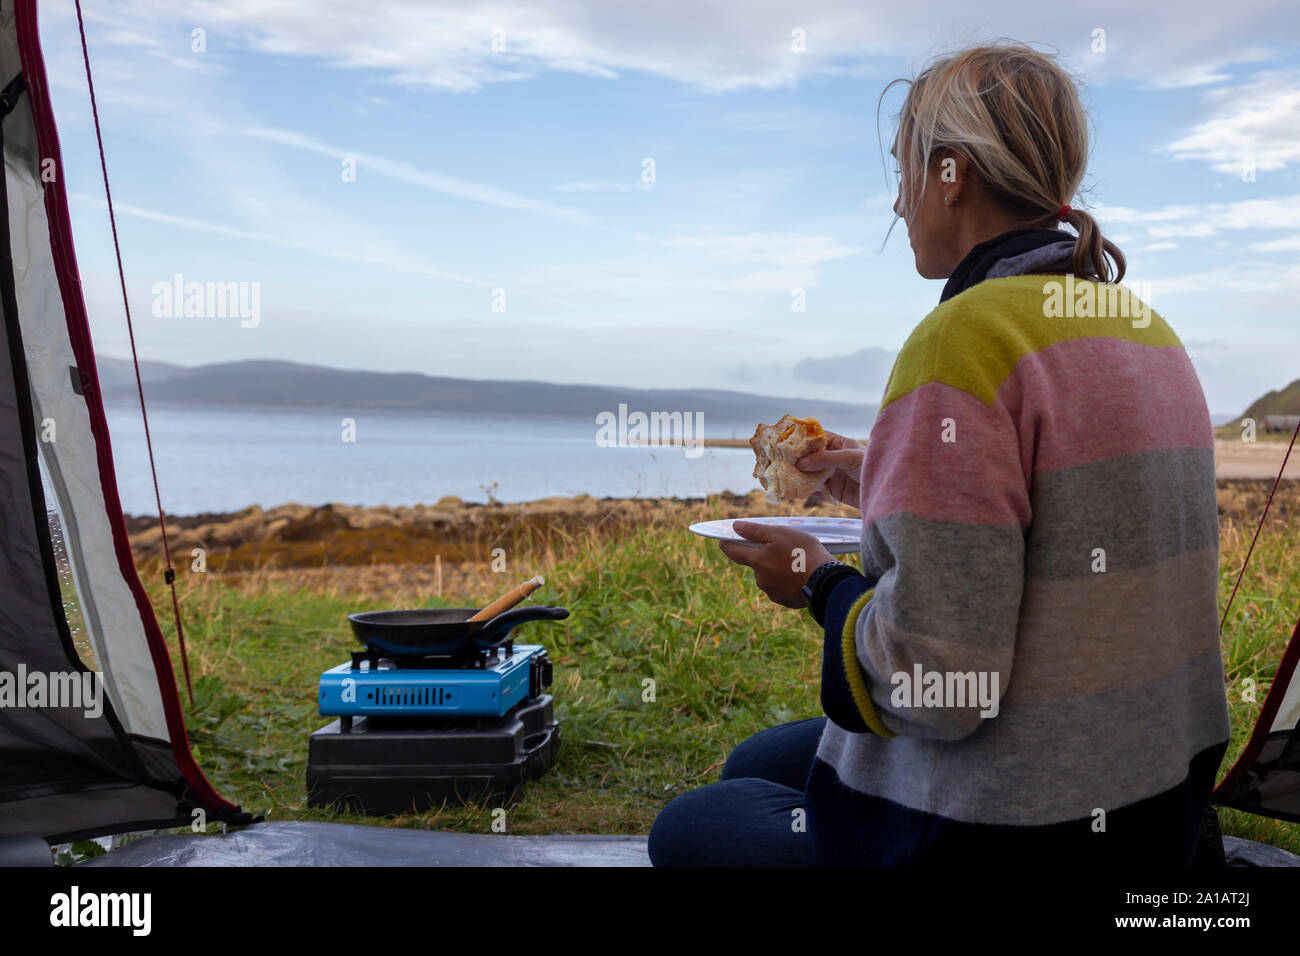 eating an egg roll at the seaside wild camping Stock Photo